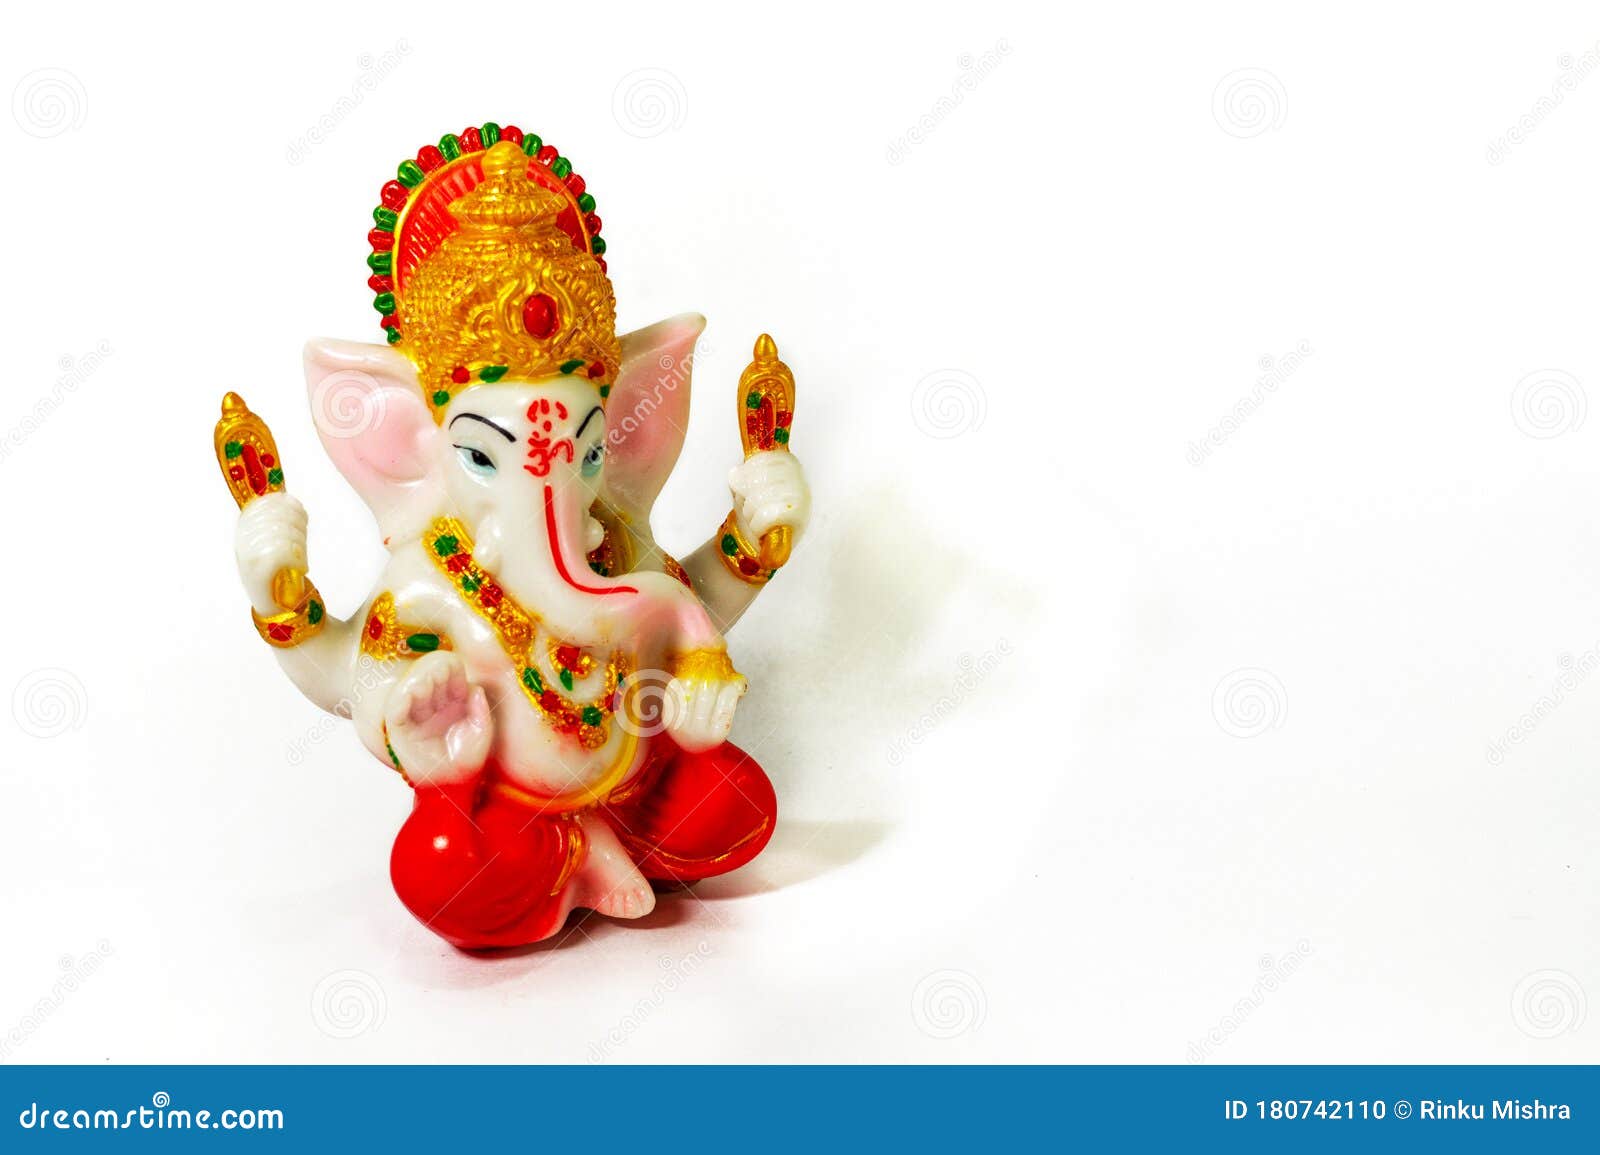 The Statue of Lord Ganesha with the Correct Composition on the White  Background Stock Photo - Image of hands, ganpati: 180742110